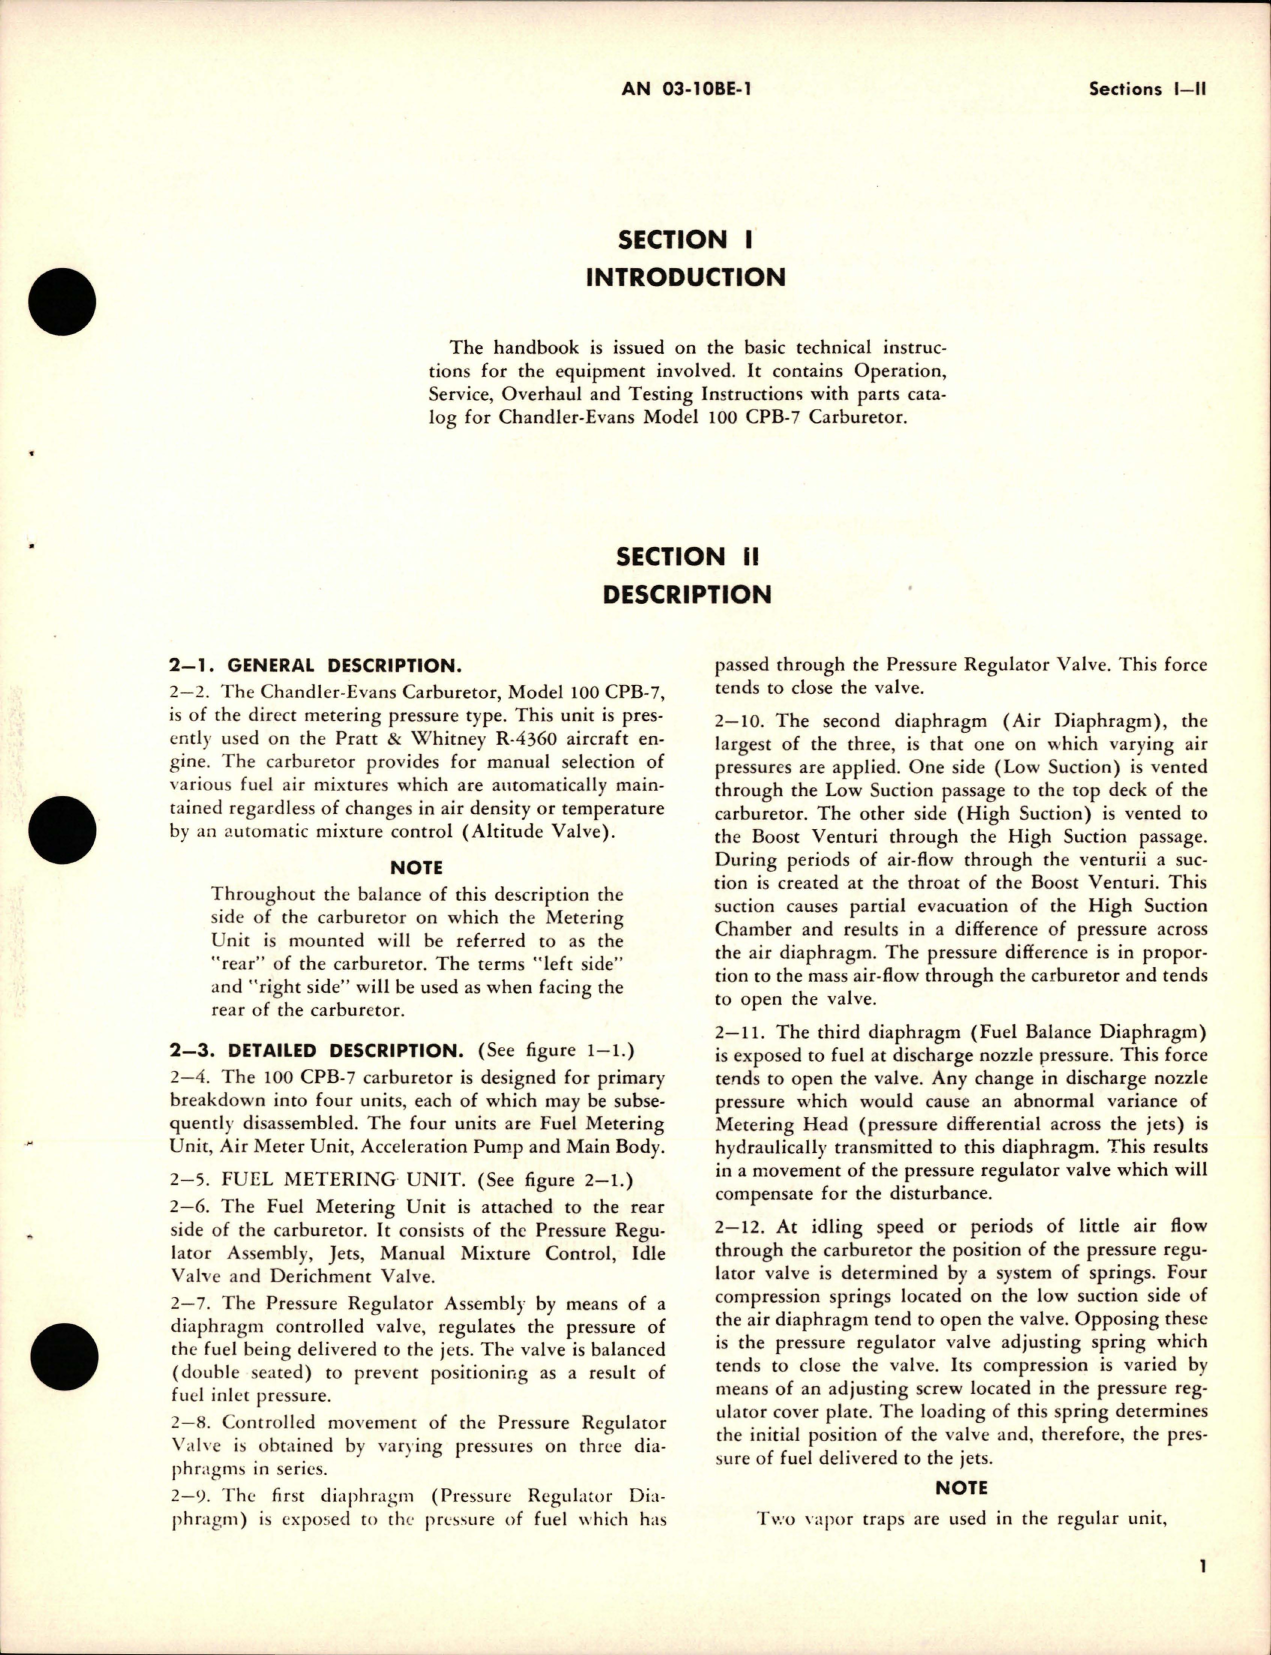 Sample page 7 from AirCorps Library document: Operation, Service, Overhaul Instructions with Parts Catalog for Carburetors - Model 100CPB-7 